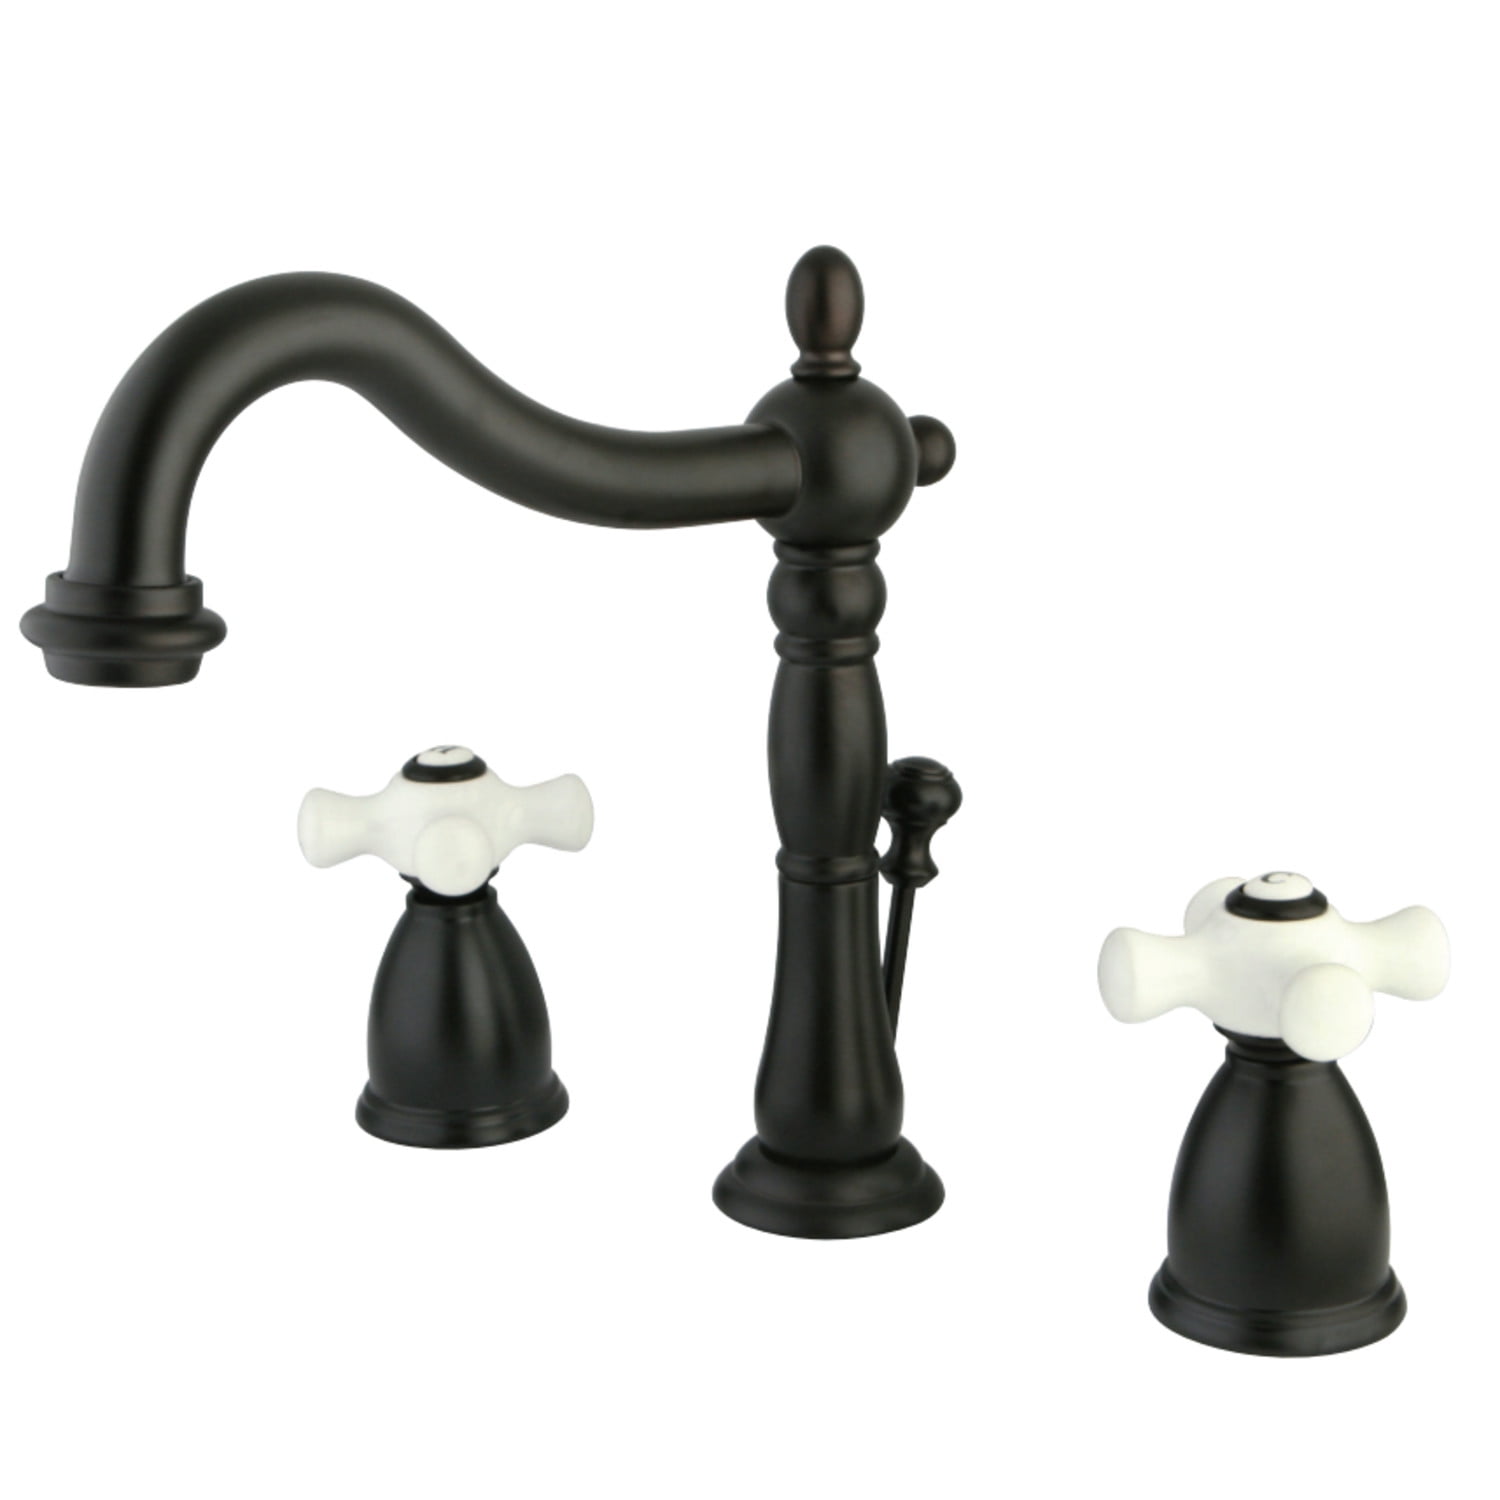 Kingston Brass KB1975PX Heritage Widespread Bathroom Faucet with Plastic Pop-Up, Oil Rubbed Bronze